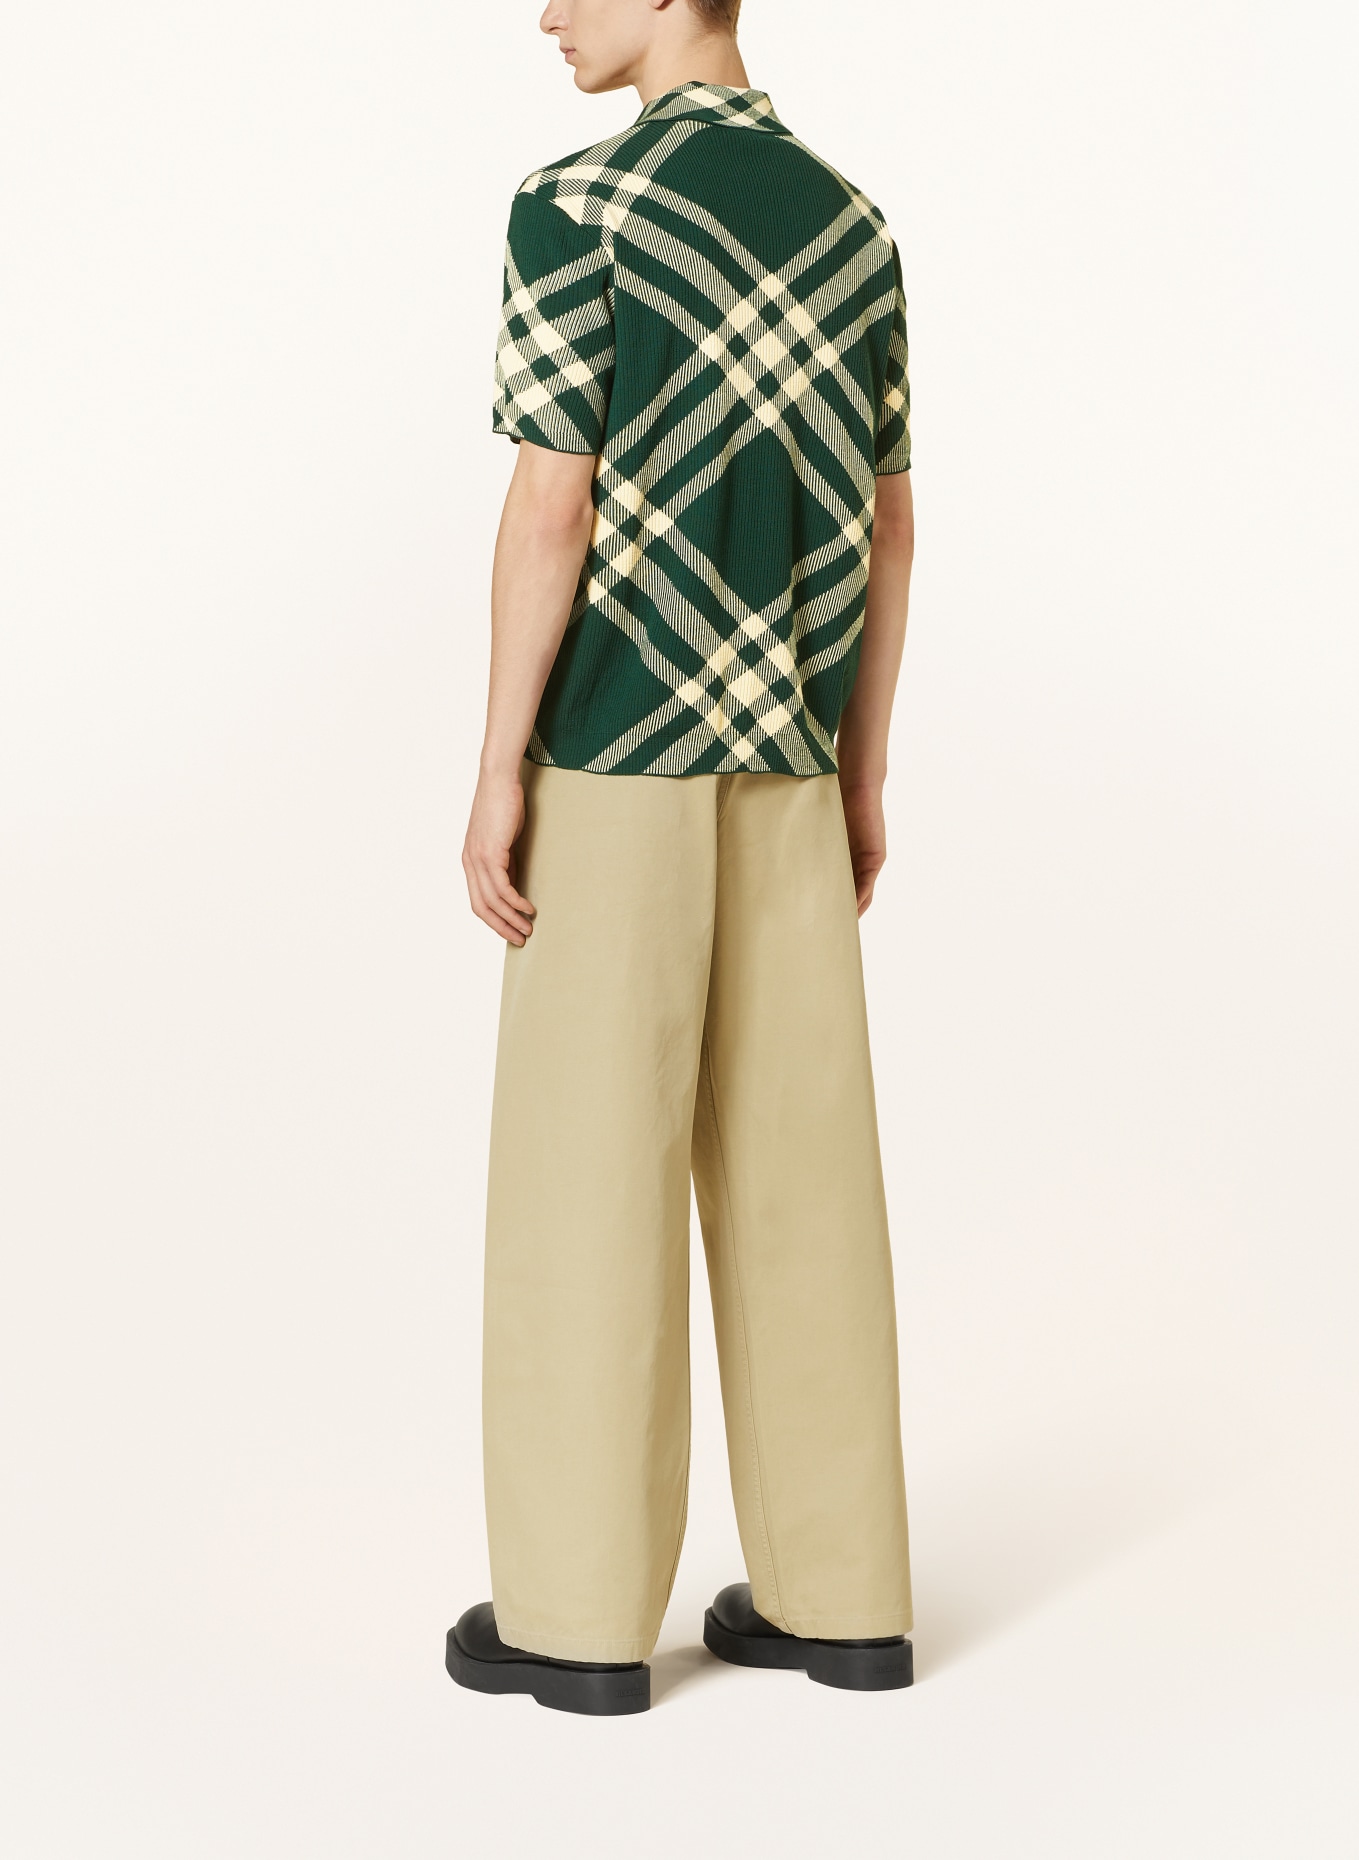 BURBERRY Knitted polo shirt DAFFODIL classic fit, Color: DARK GREEN/ LIGHT YELLOW (Image 3)